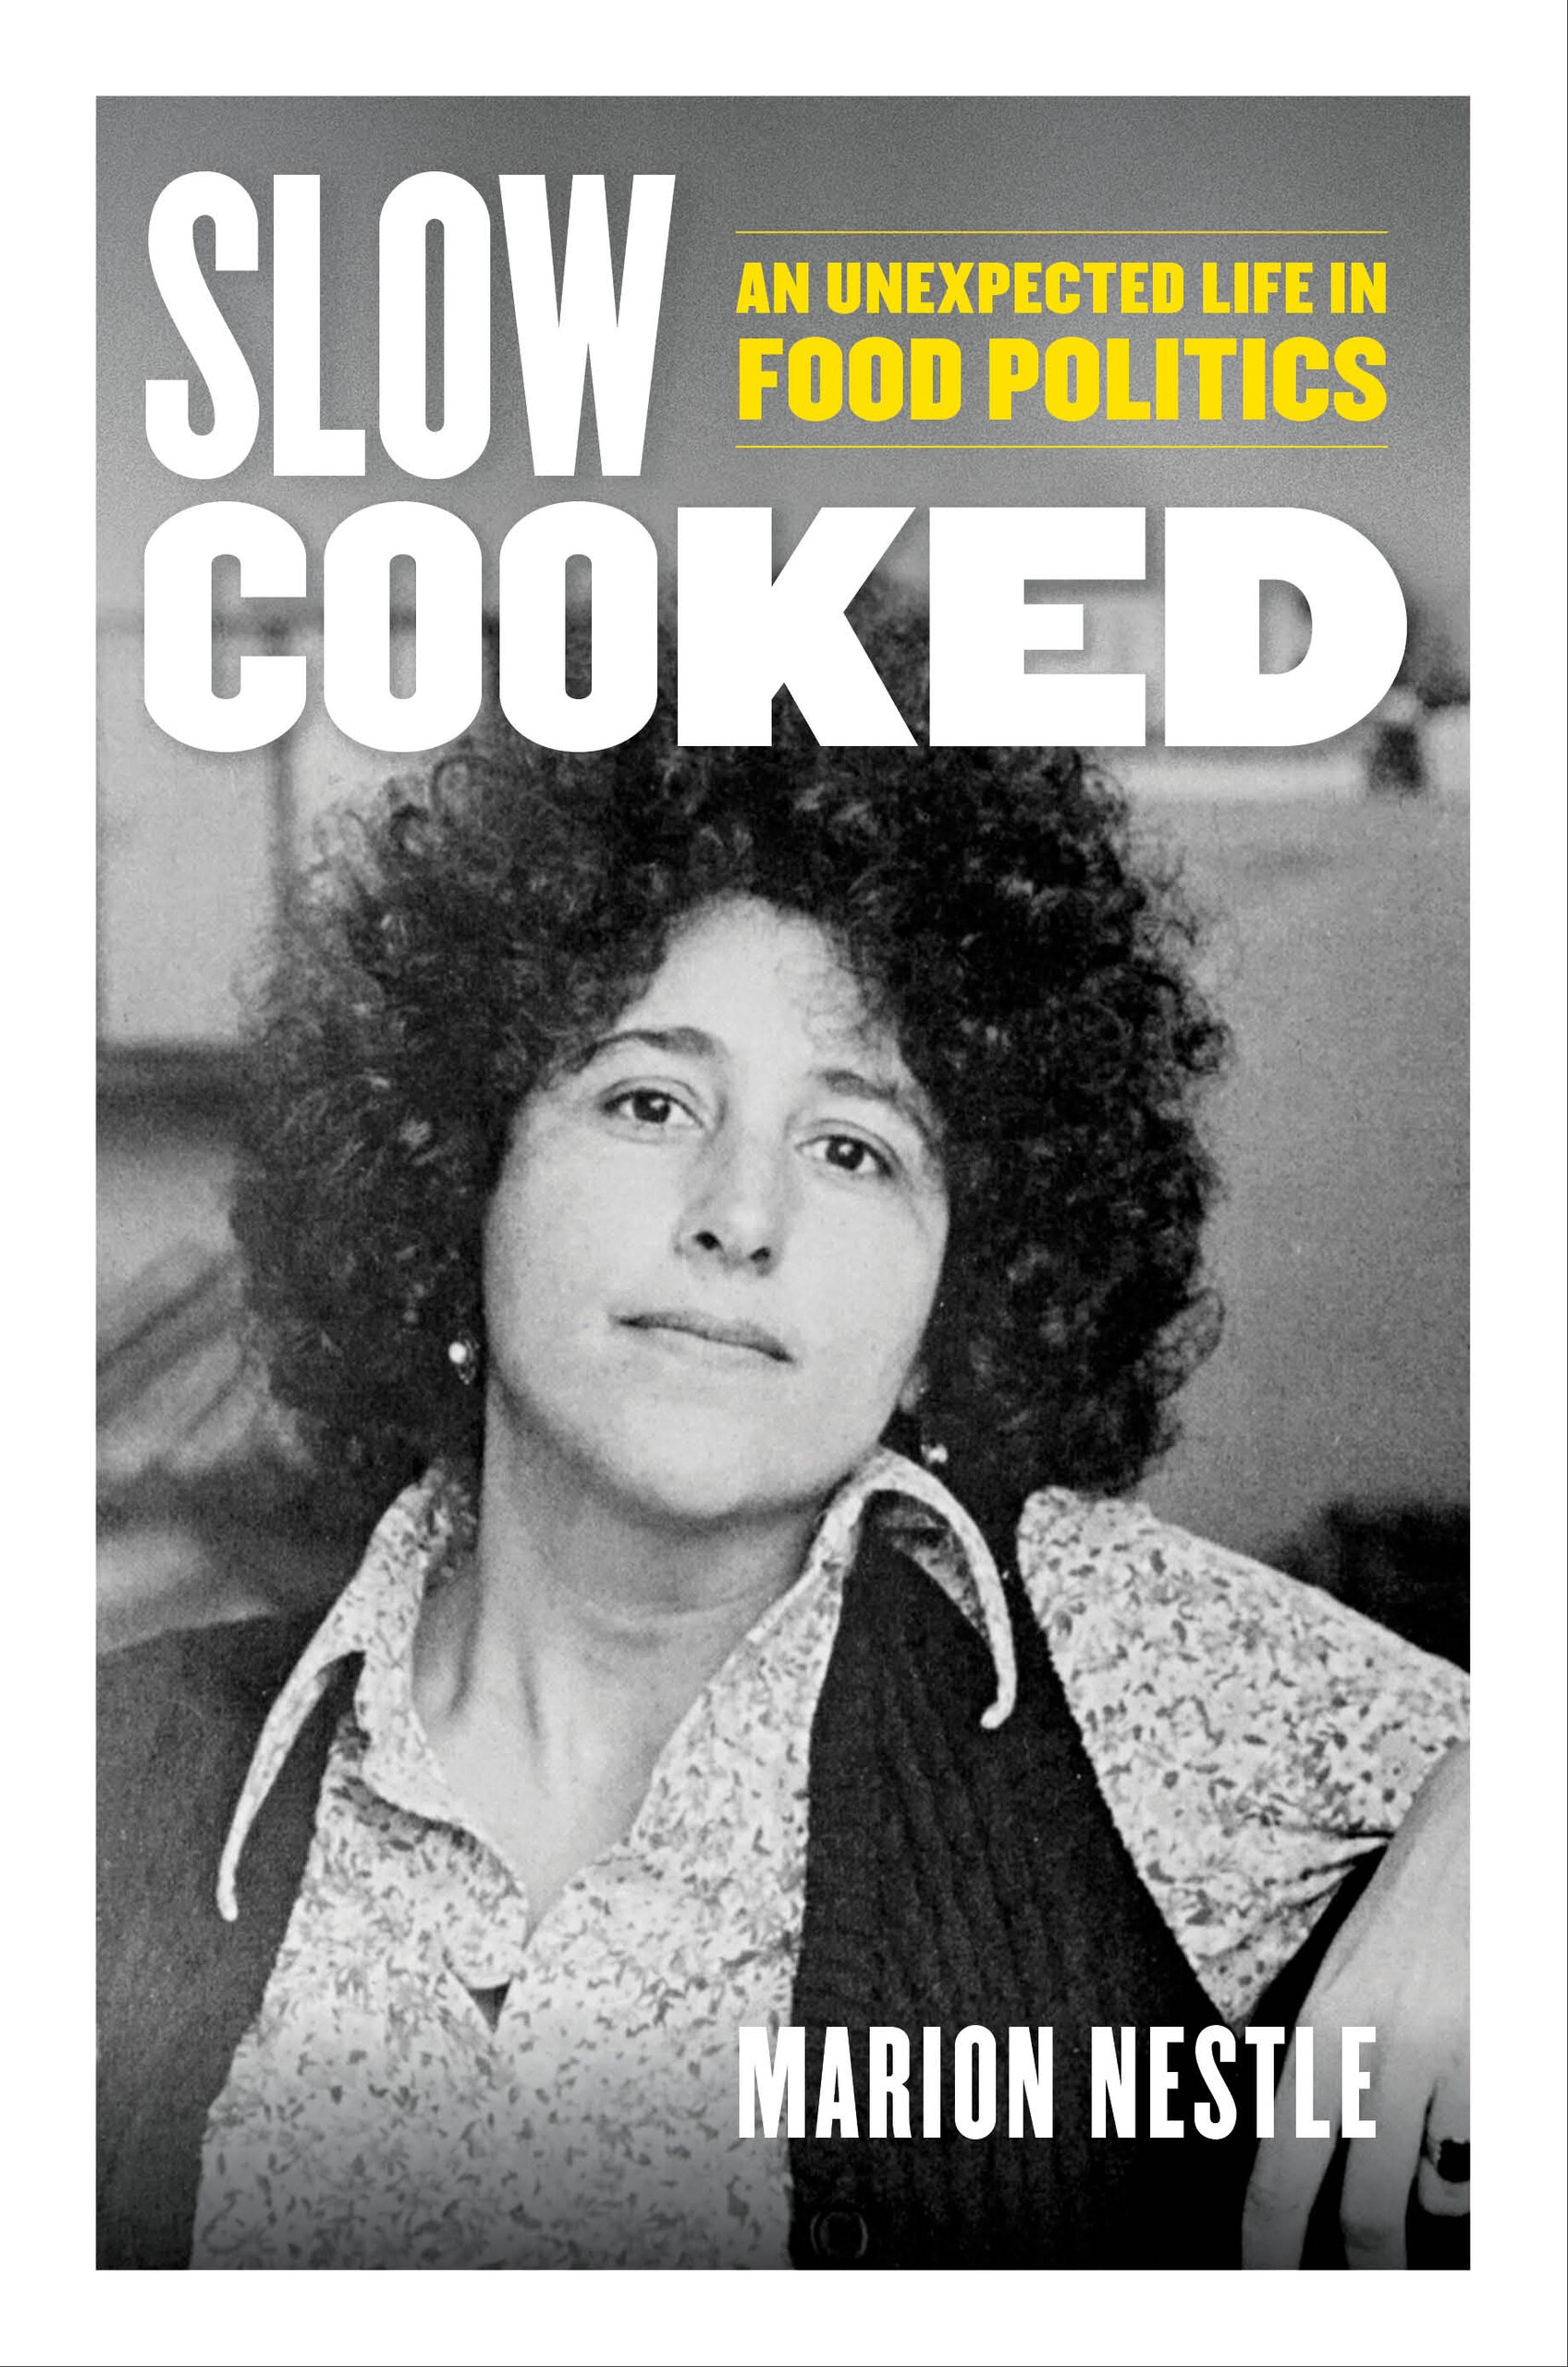 Marion Nestle: Slow Cooked: An Unexpected Life in Food Politics